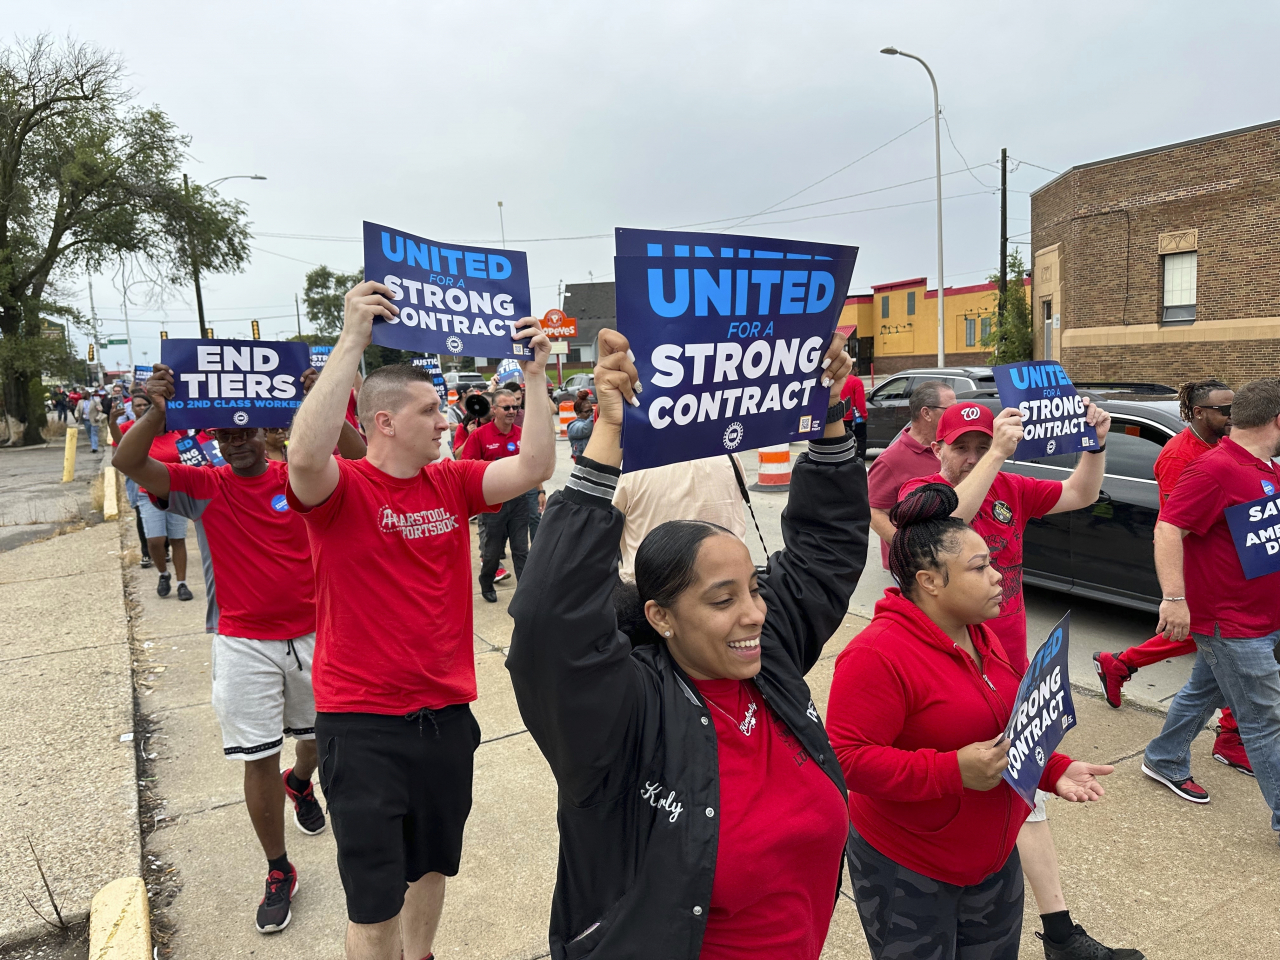 United Auto Workers members march holding signs at a union protest held near a Stellantis factory in Detroit on Aug. 23. (AP)